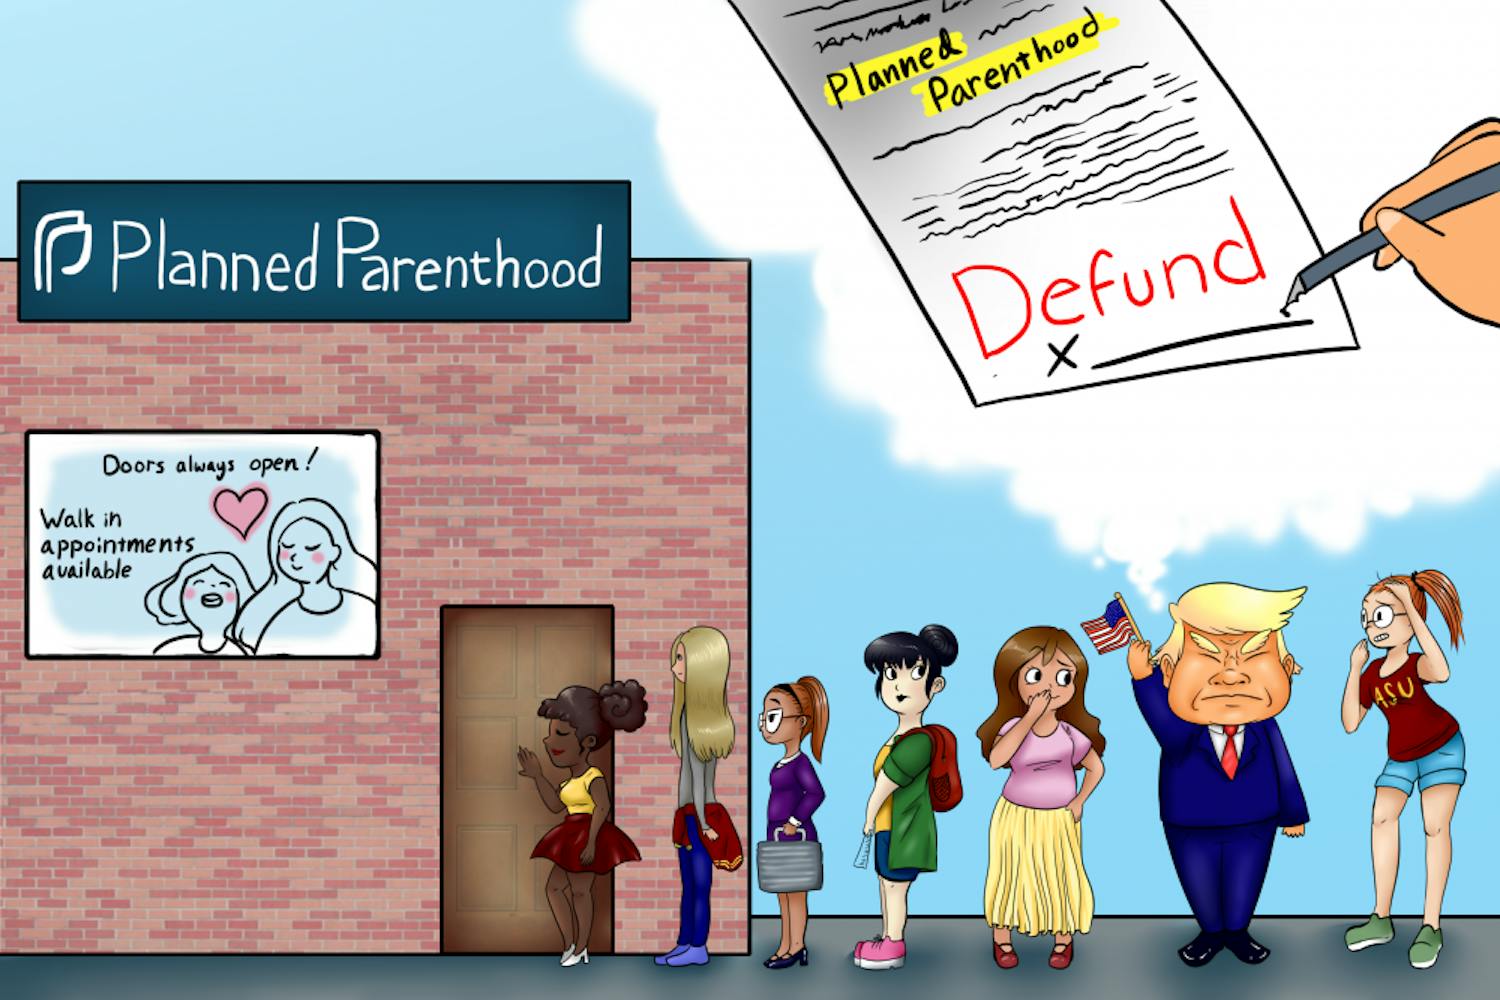 Planned Parenthood Student Reactions